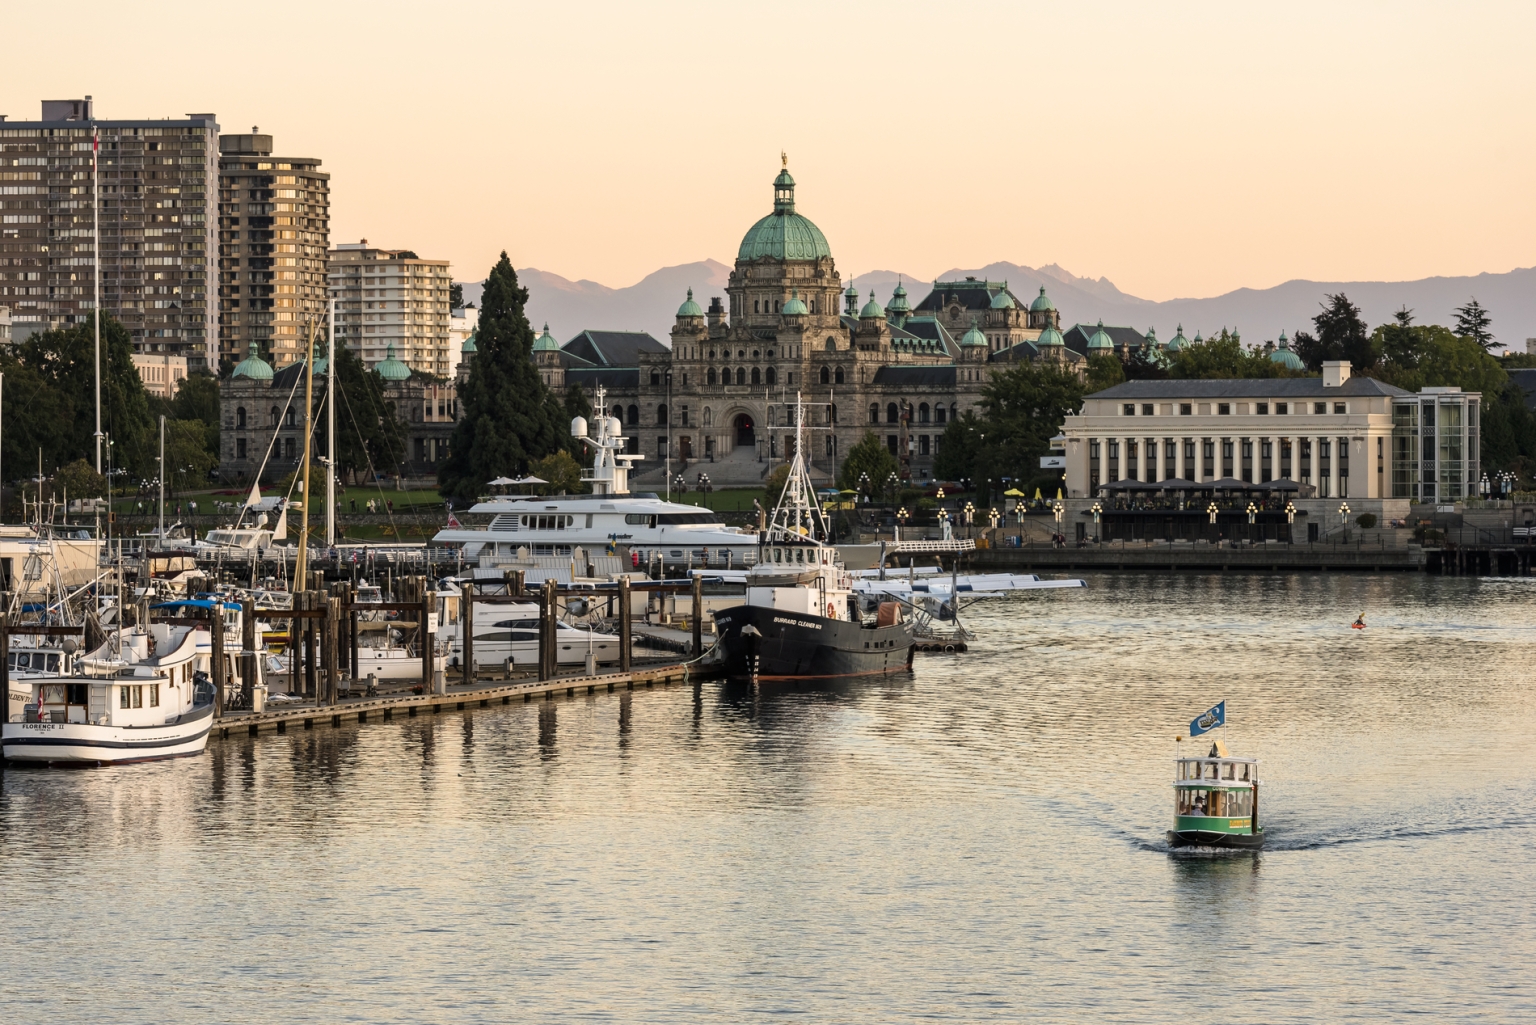 Victoria's Inner Harbour as a boat taxi cruises along the water and the sunsets